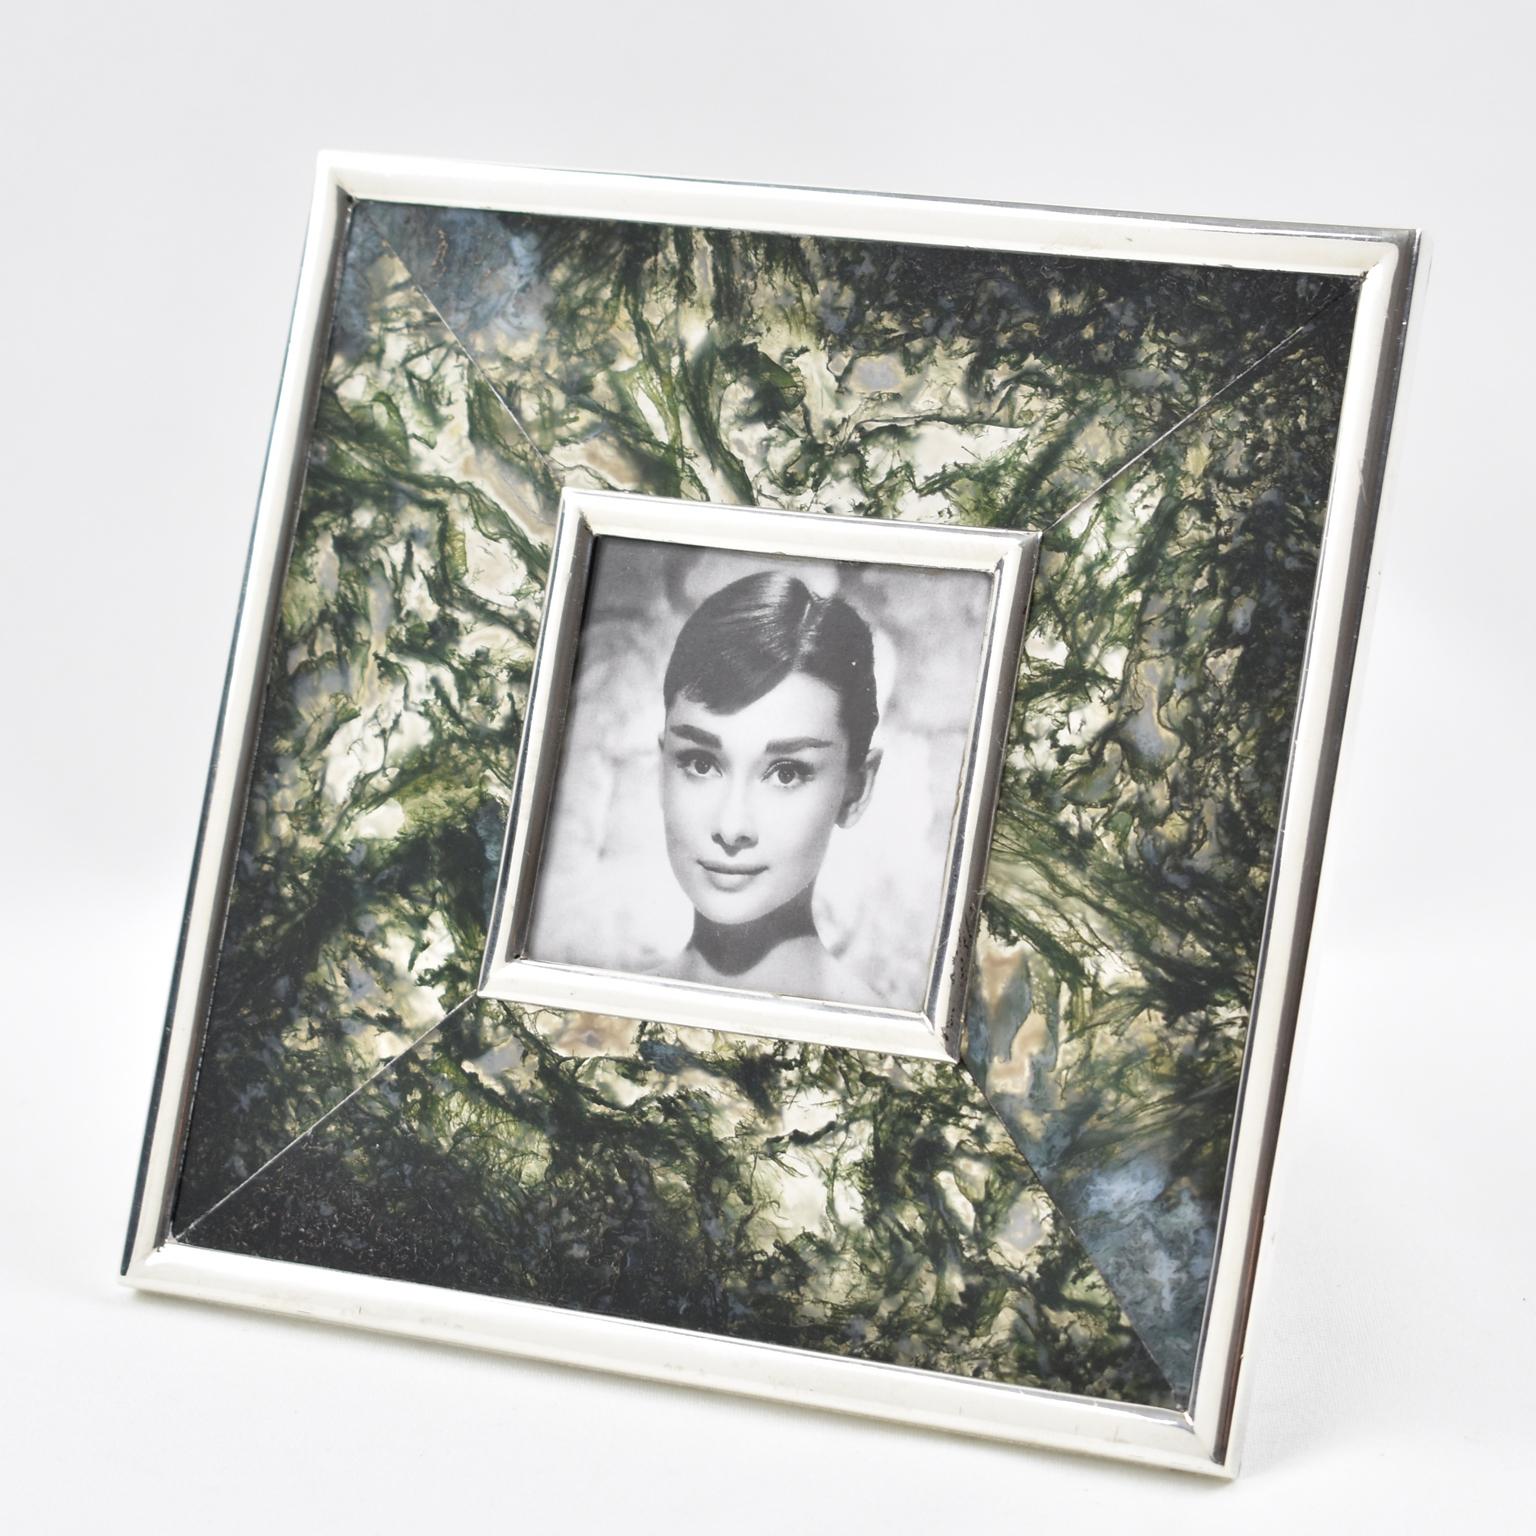 Lovely Italian design picture photo frame. Square shape with sterling silver framing compliment with thick slabs of green moss agate stone. Sterling silver easel at the back. Stamped 925 on the easel with master silversmith legal